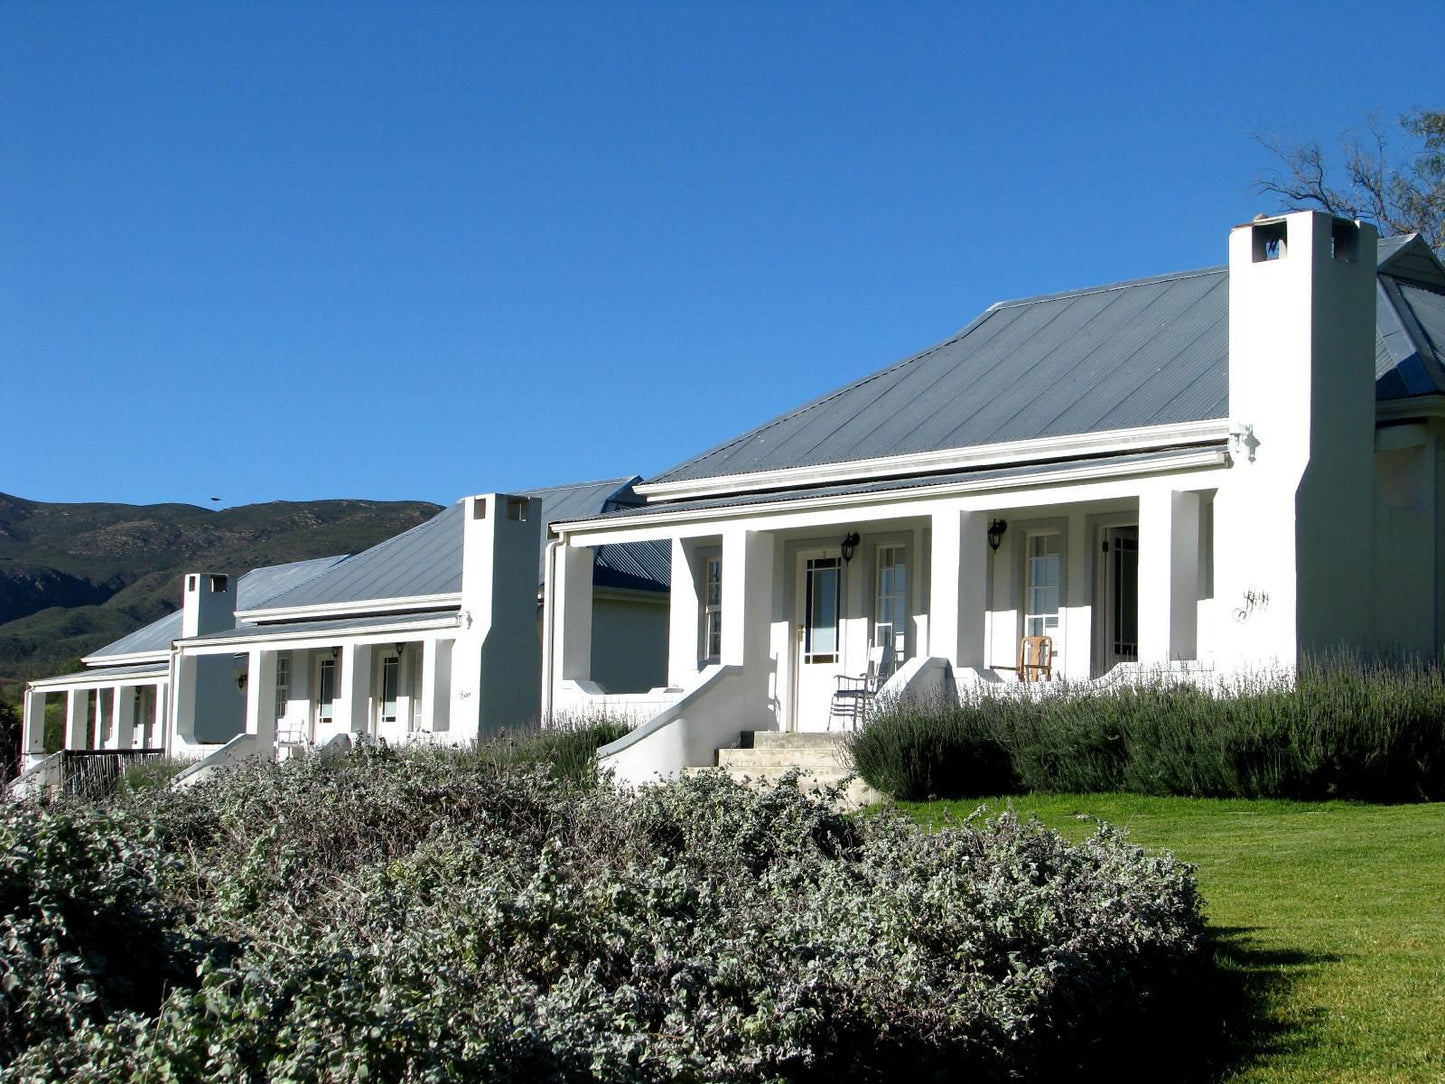 Swartberg Country Manor Oudtshoorn Western Cape South Africa House, Building, Architecture